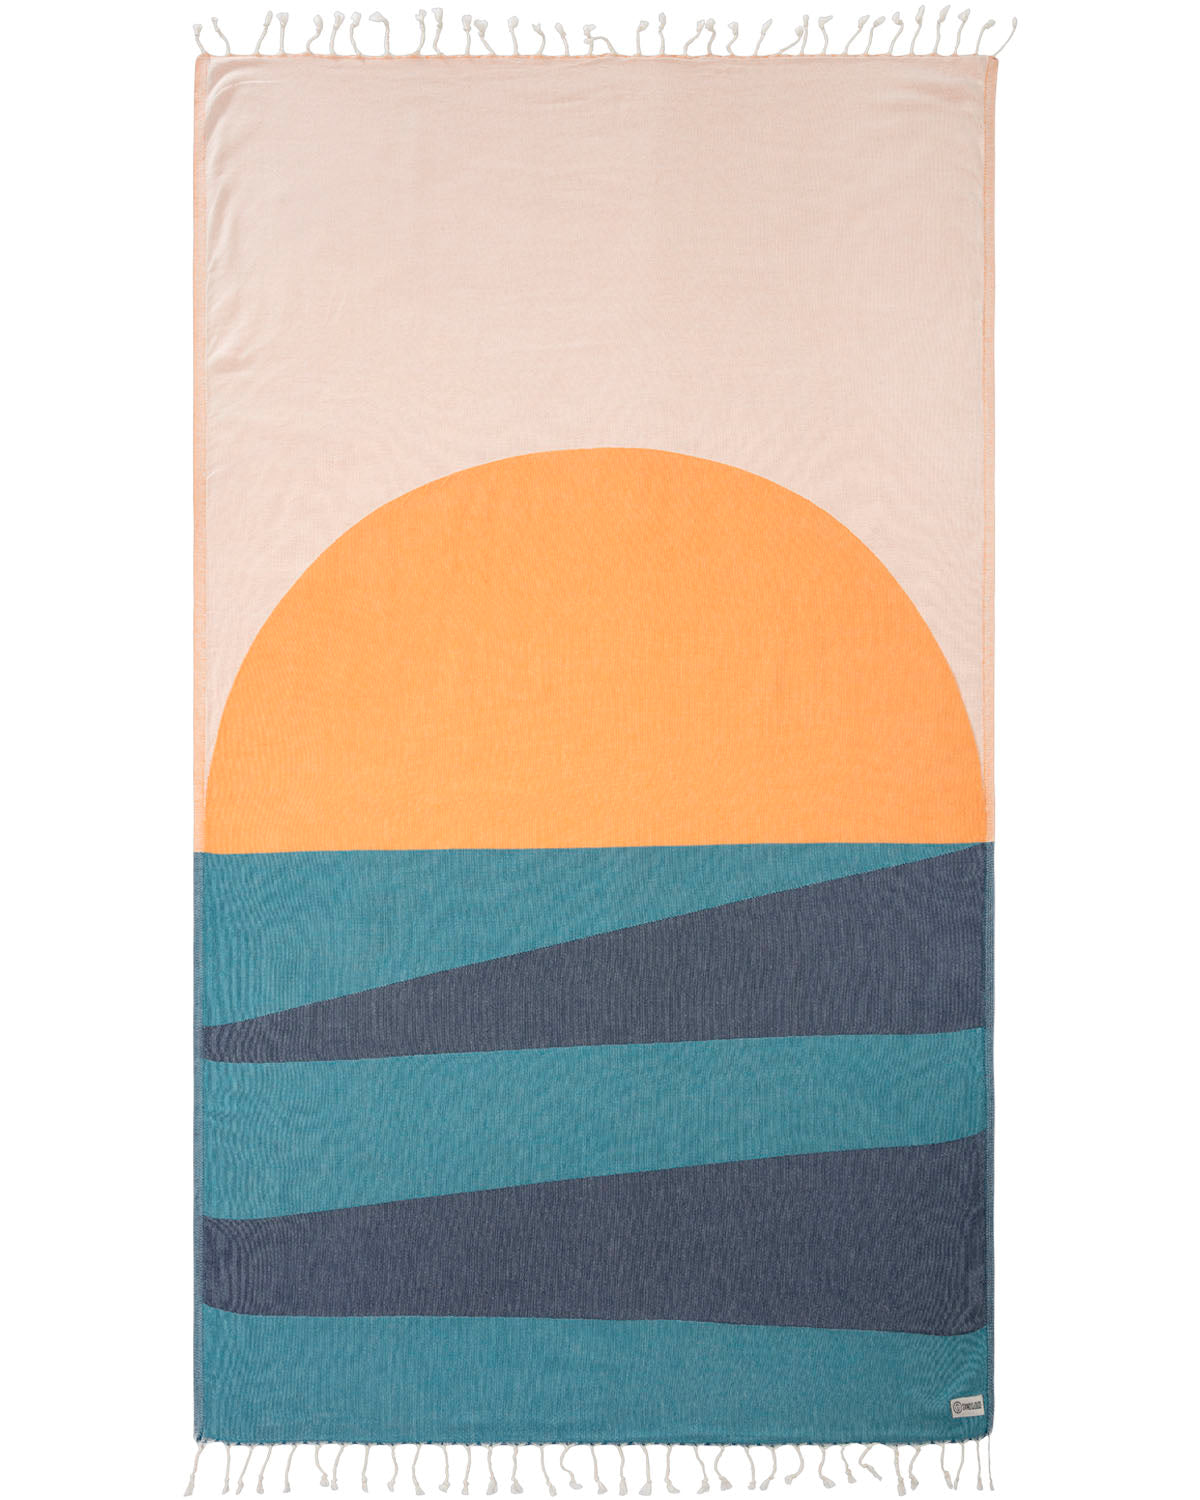 Back view of Sand cloud geo sunset towel. 